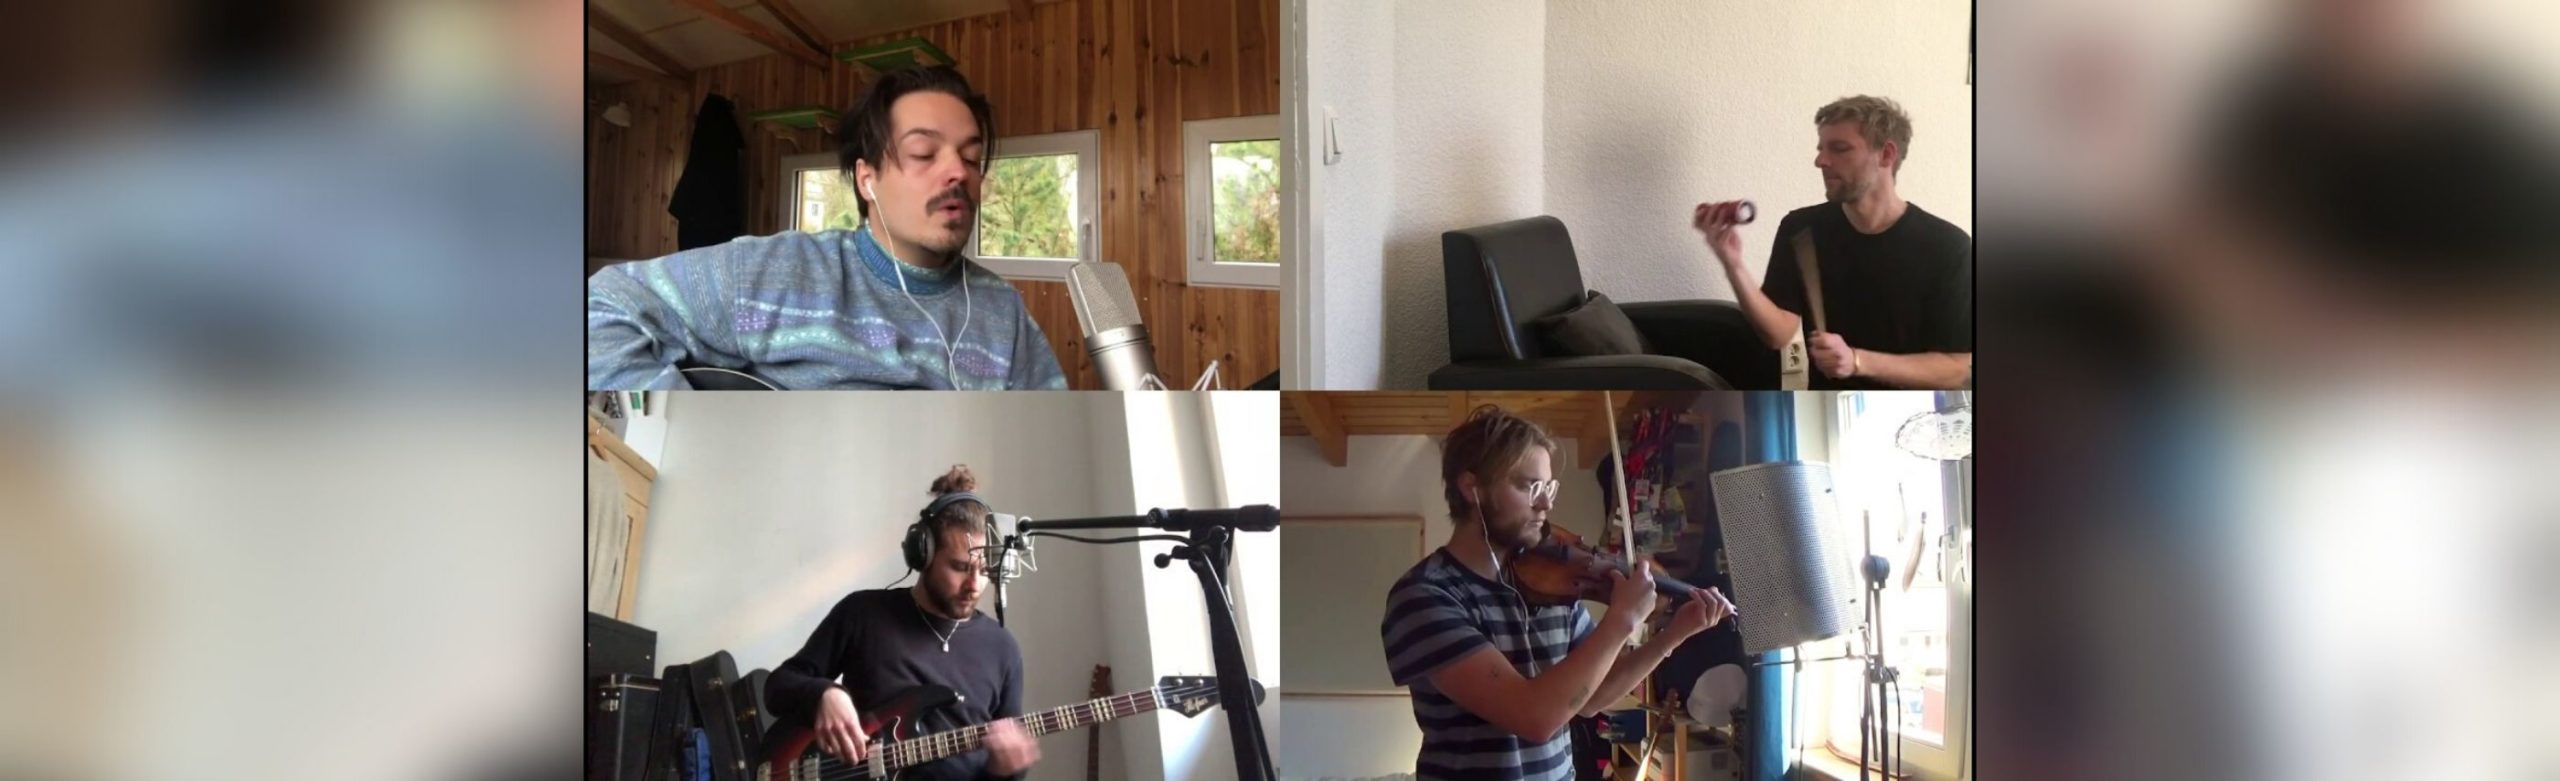 WATCH: Milky Chance Performs Their Second “Stay Home Session” Image